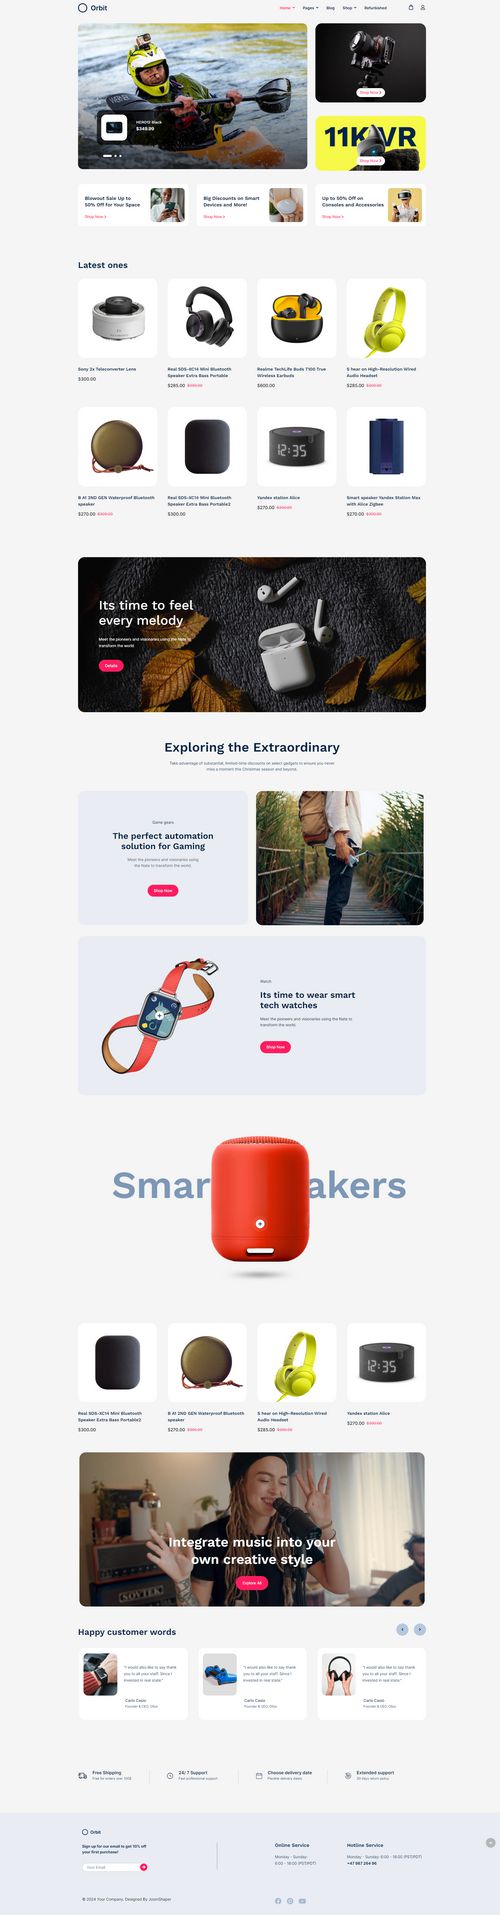 Orbit - eCommerce template for tech gadgets and electronics.